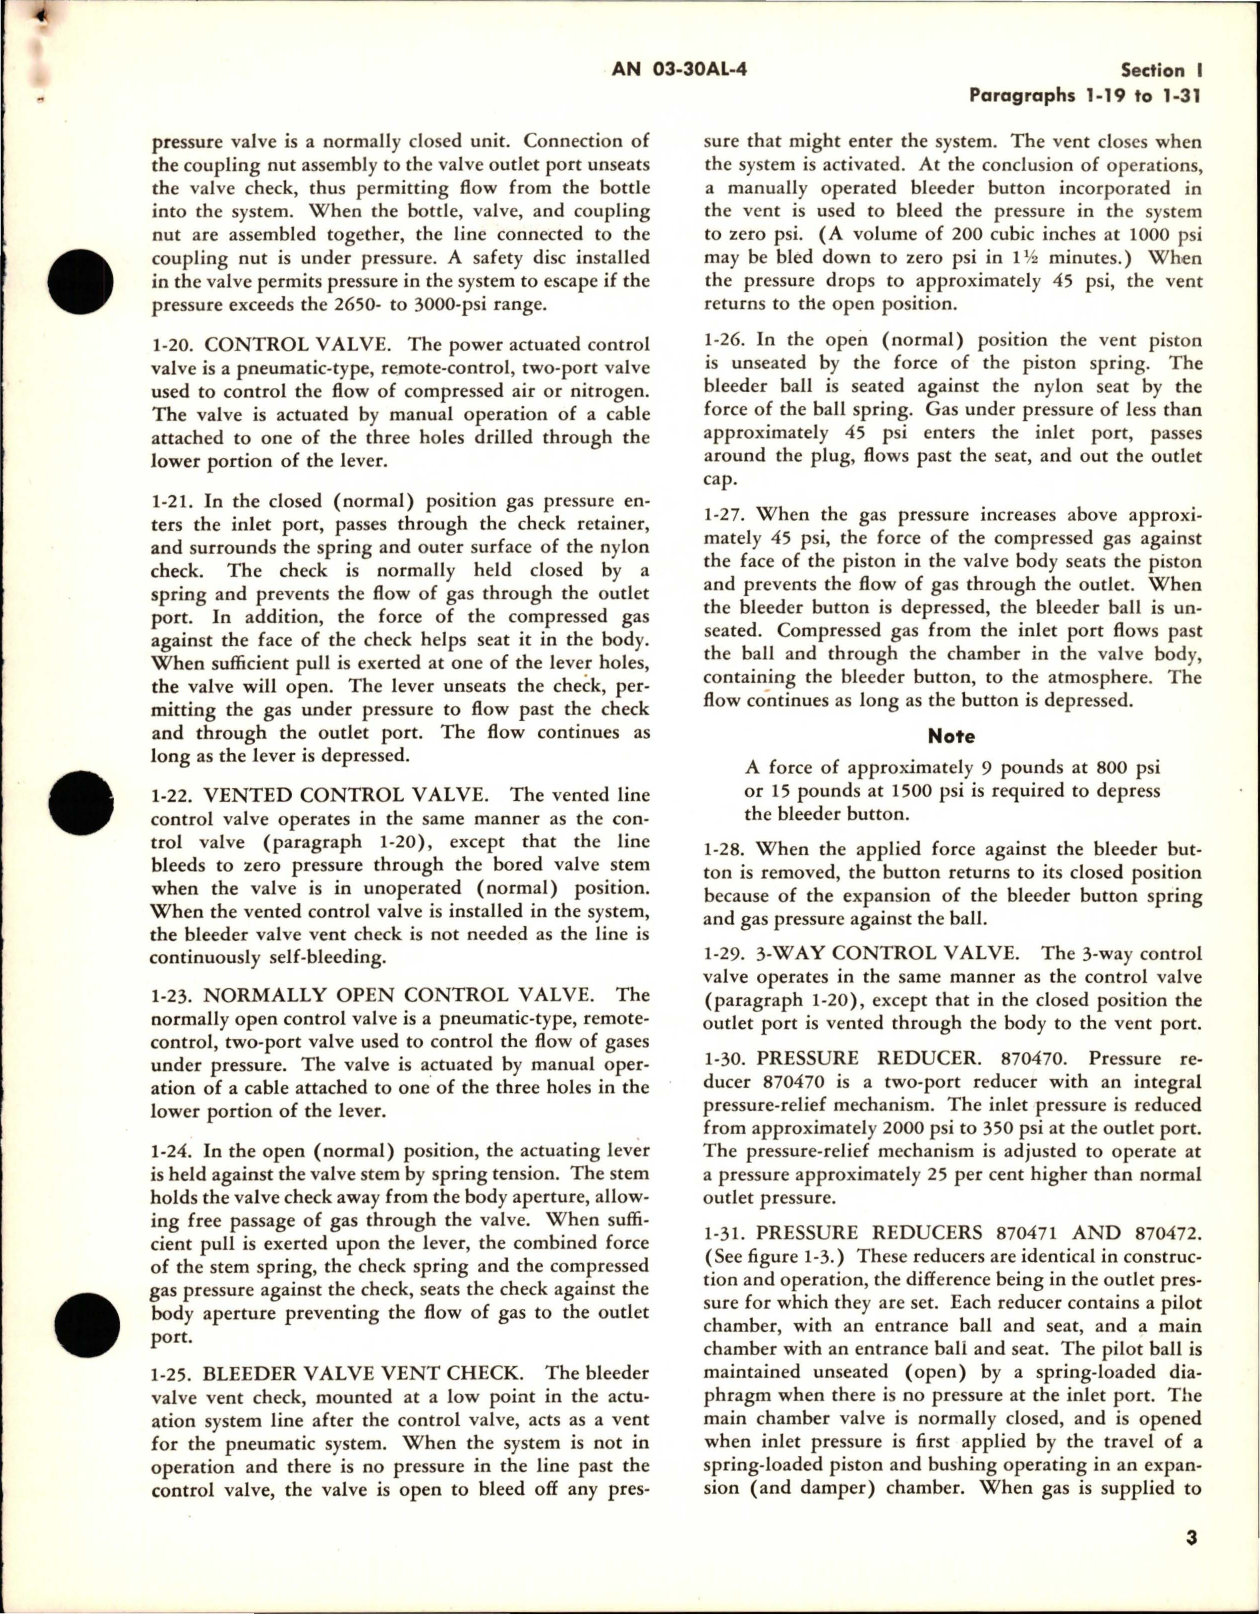 Sample page 9 from AirCorps Library document: Overhaul Instructions for Pneumatic and Purging Equipment